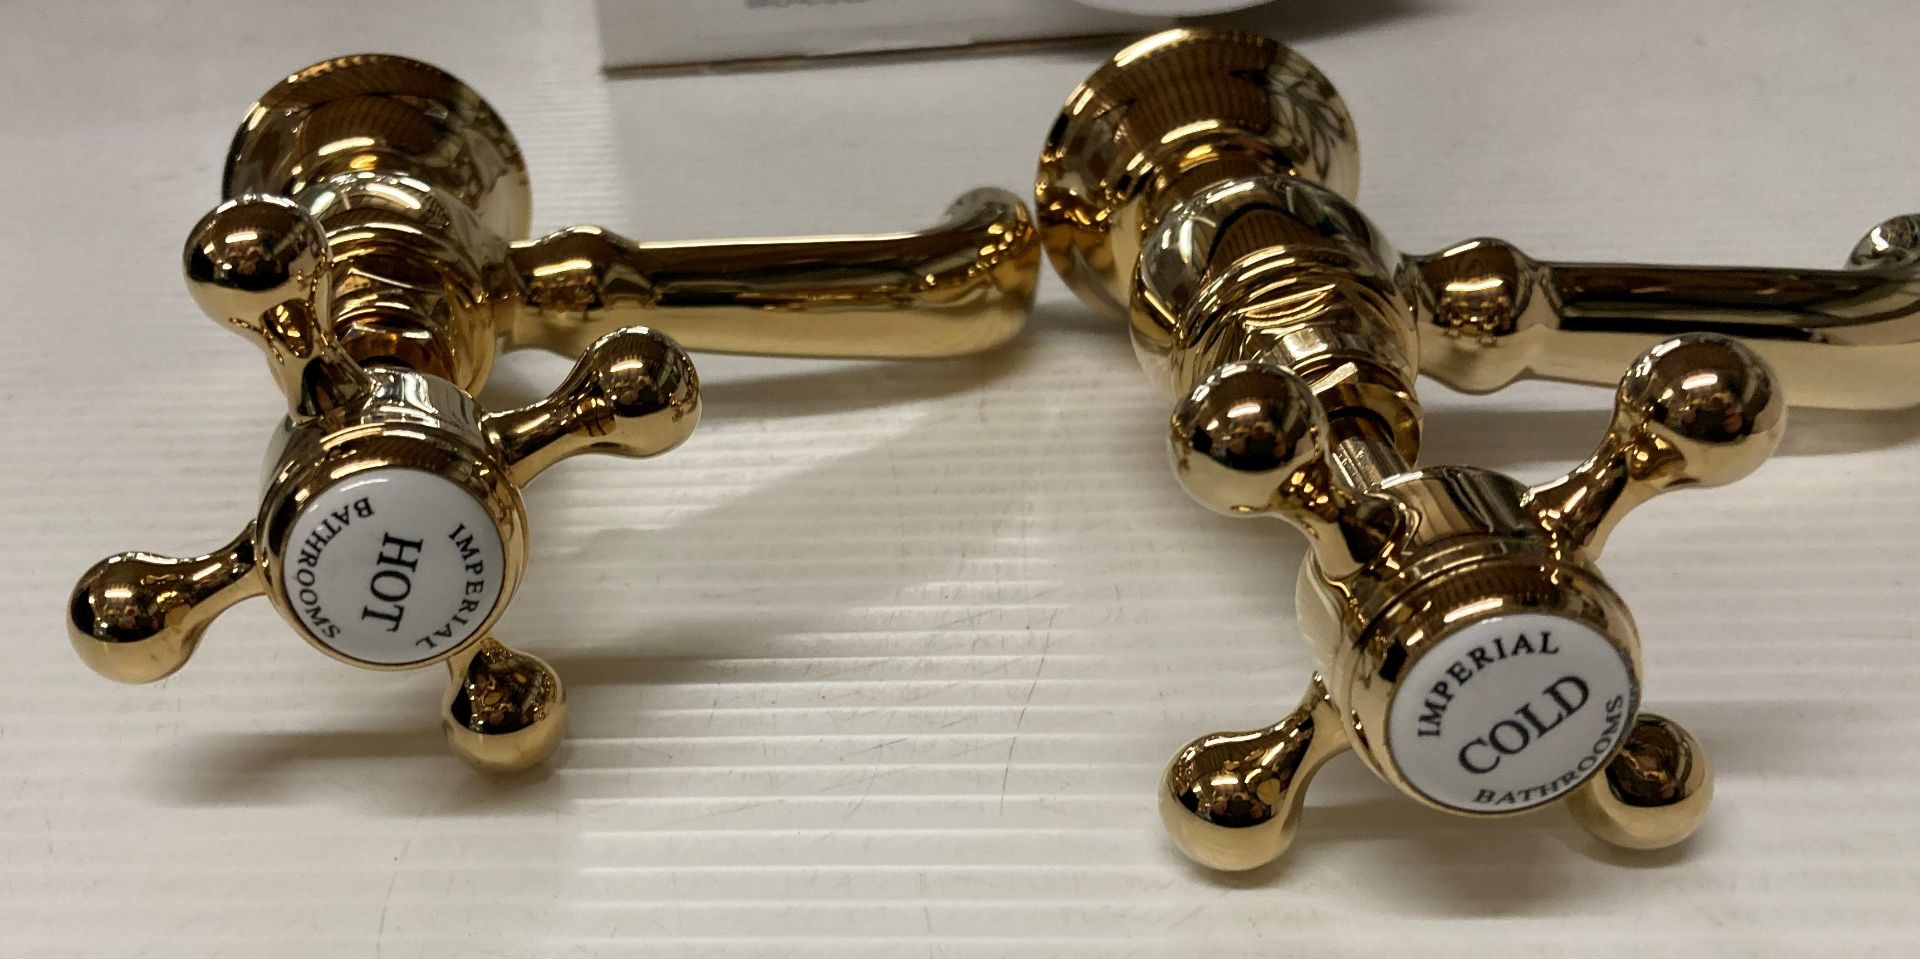 A pair of Imperial 1/2" basin taps in antique gold (saleroom location: R13) - Image 2 of 2